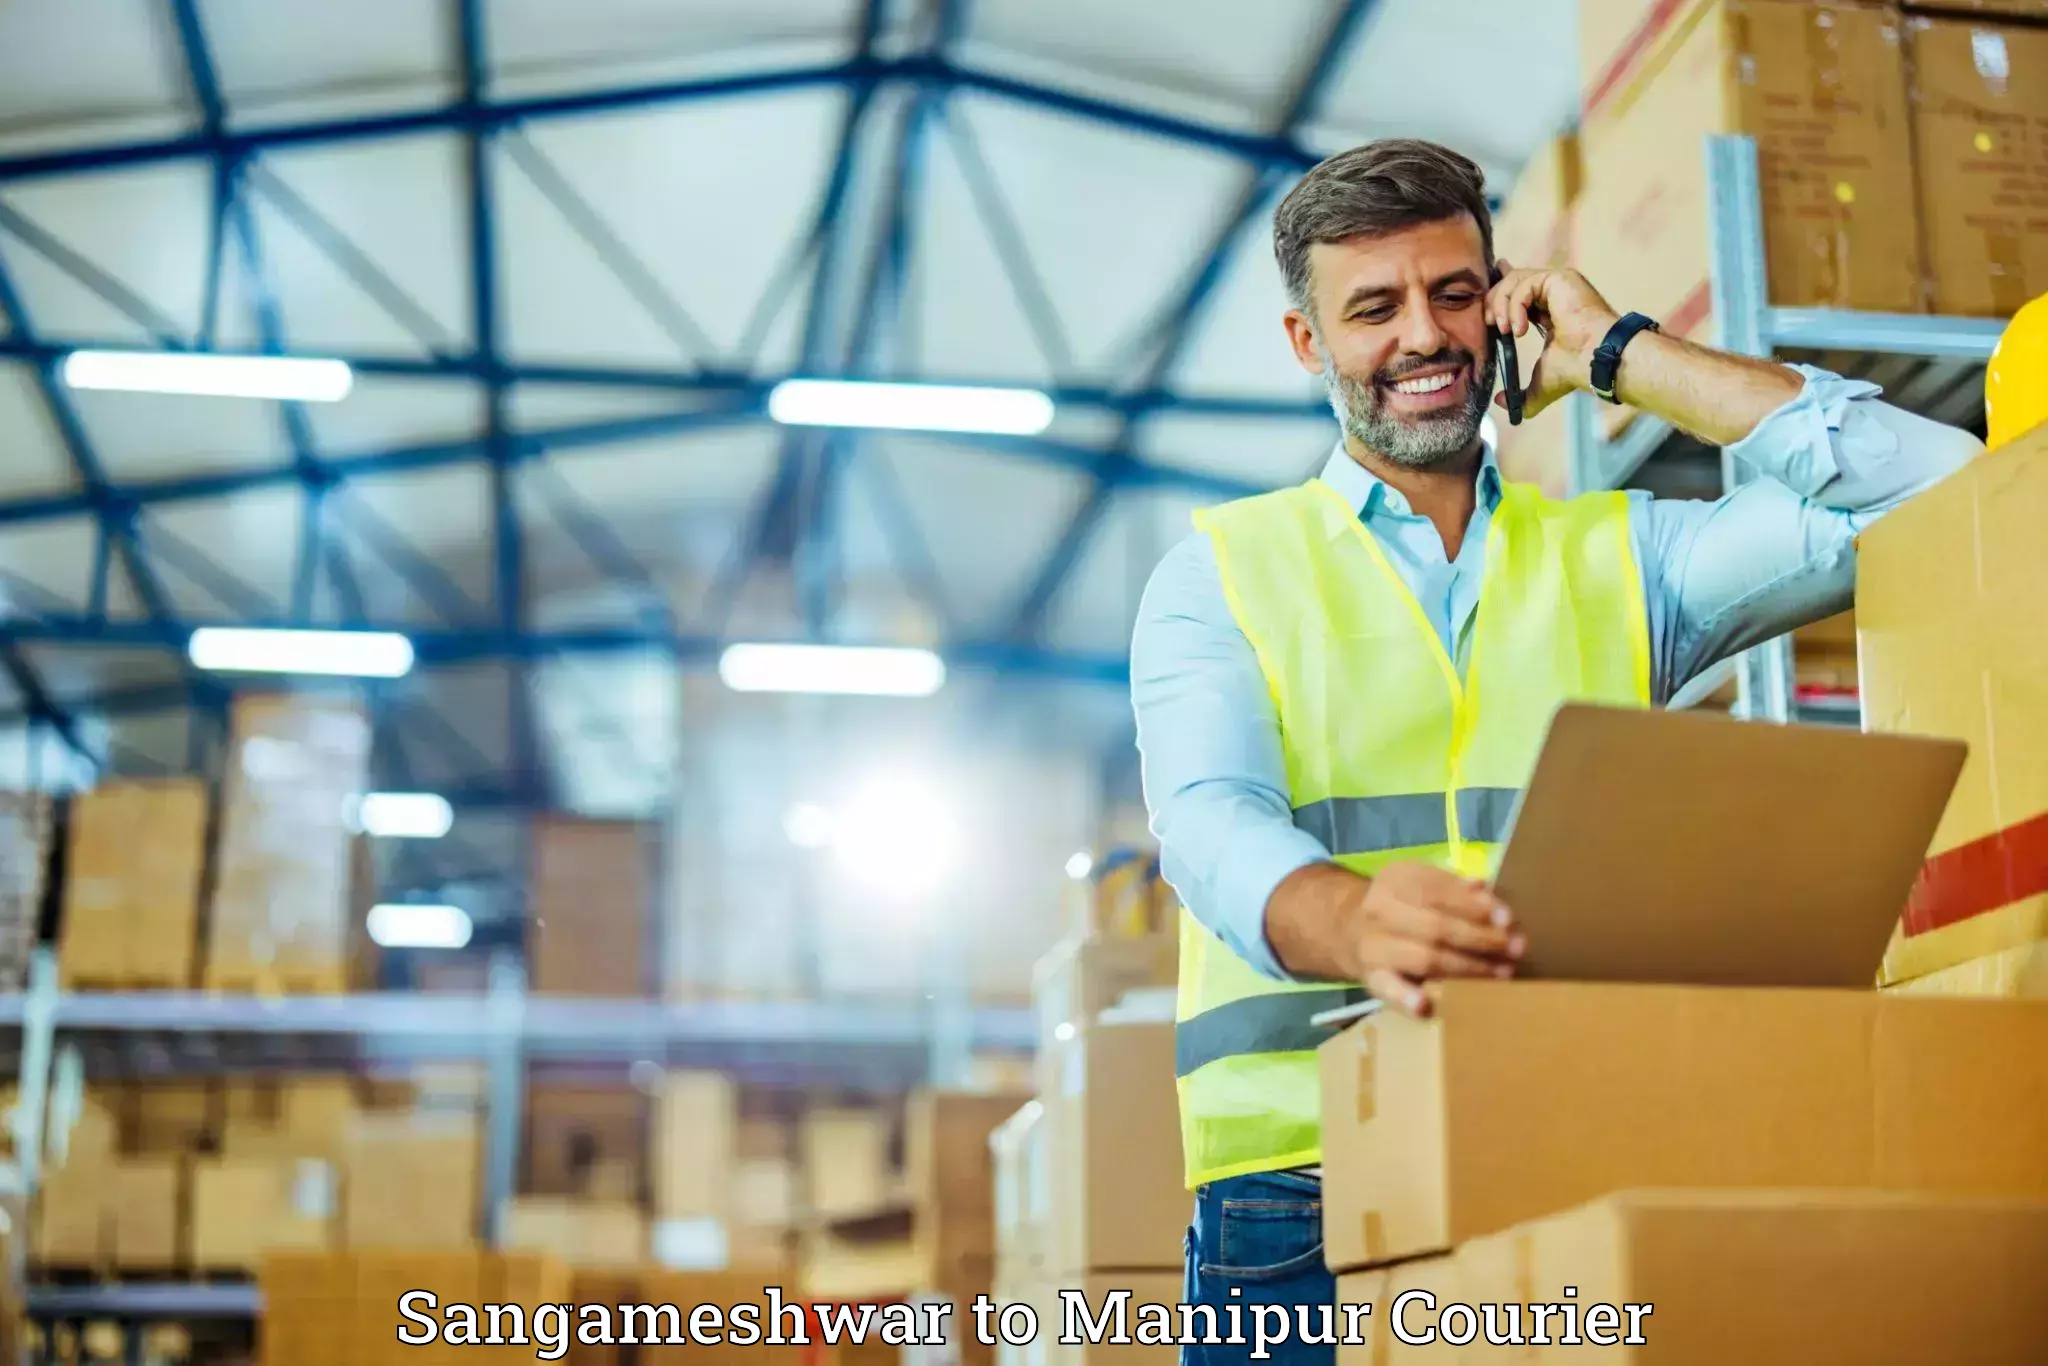 Luggage shipment specialists Sangameshwar to Manipur